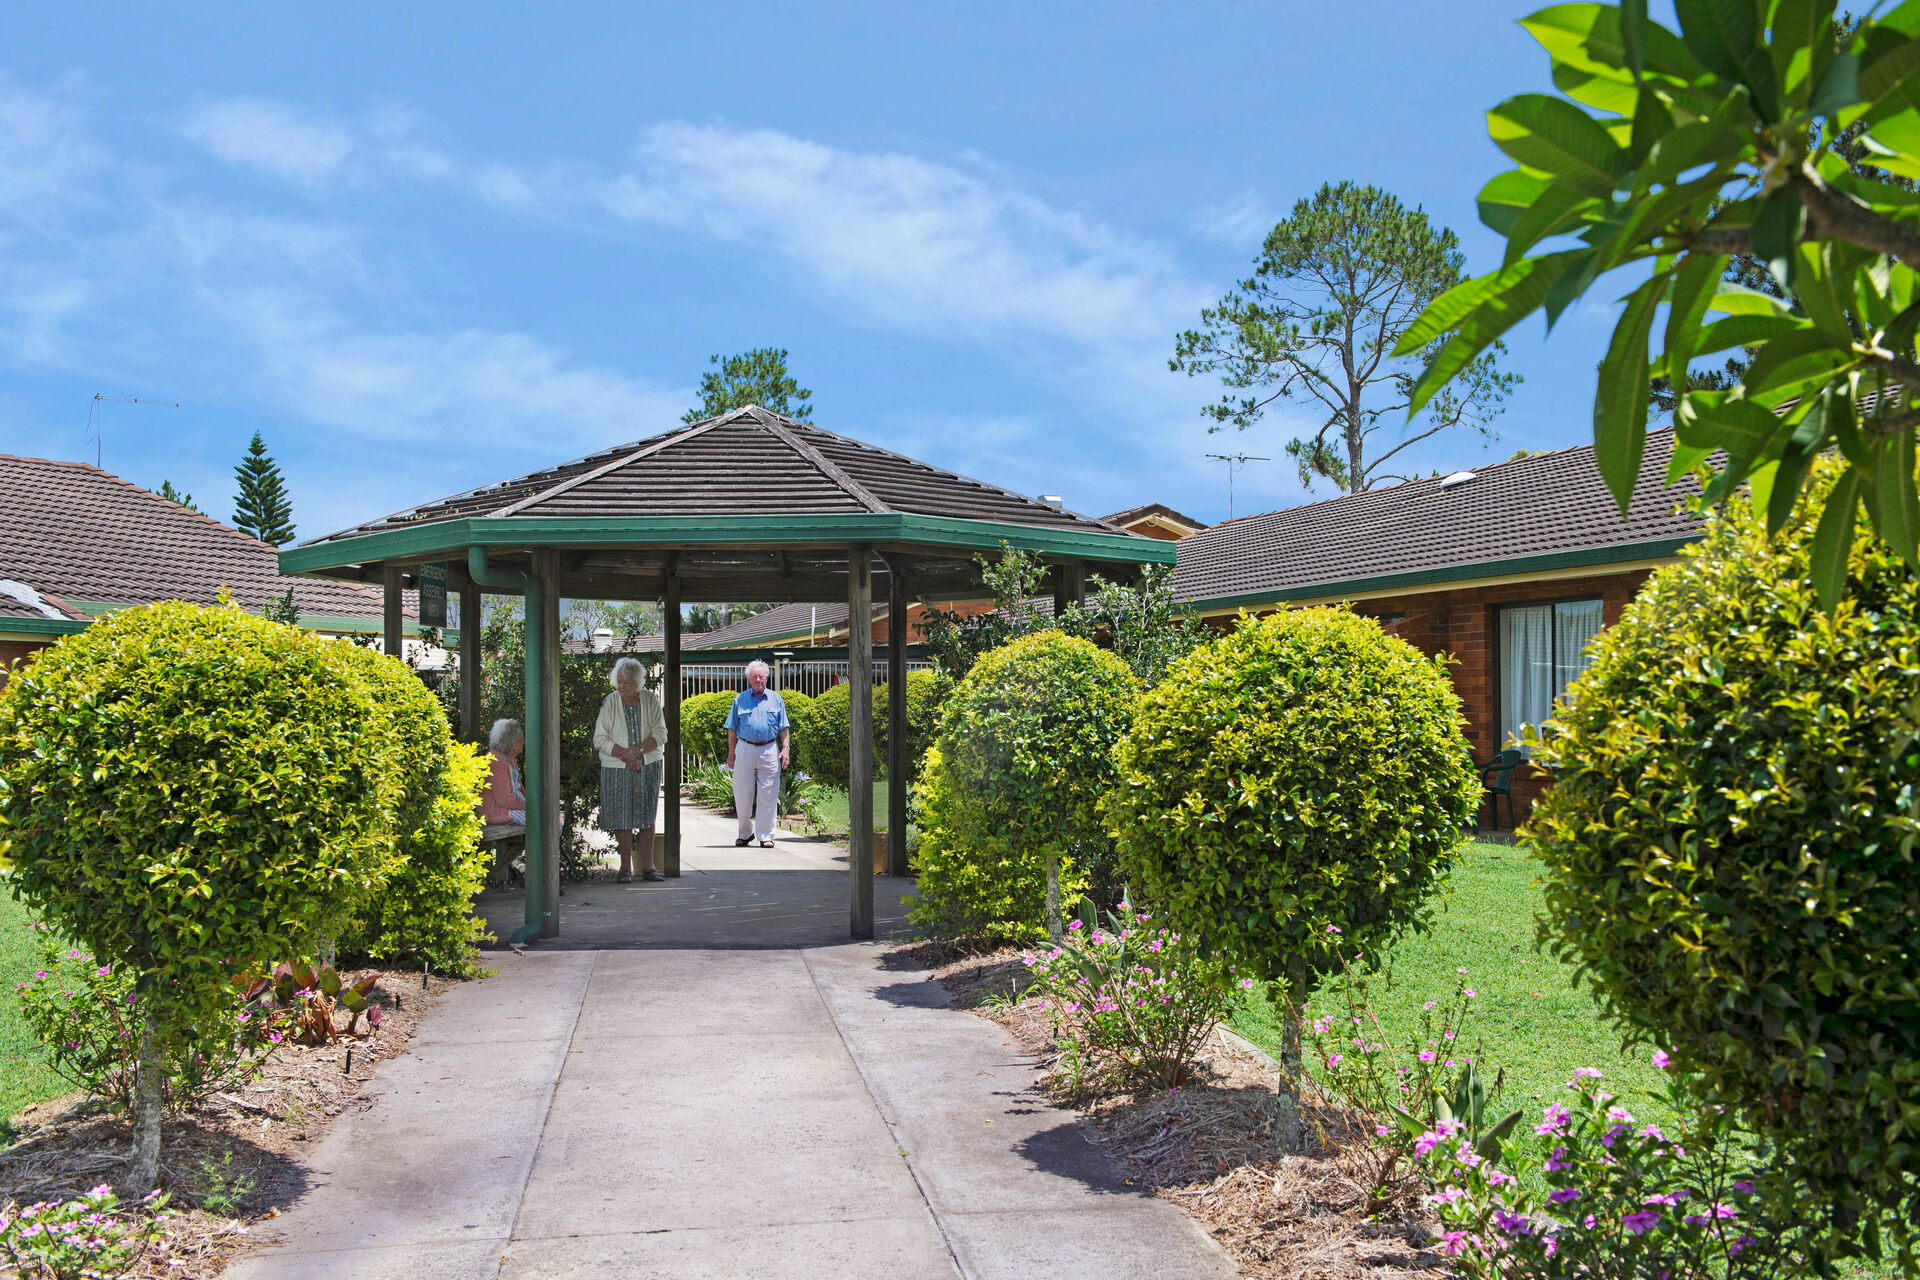 beautiful outdoor gardens with aged care residents sitting under a gazebo at baptistcare mid richmond centre residential aged care facility in coraki nsw far north coast